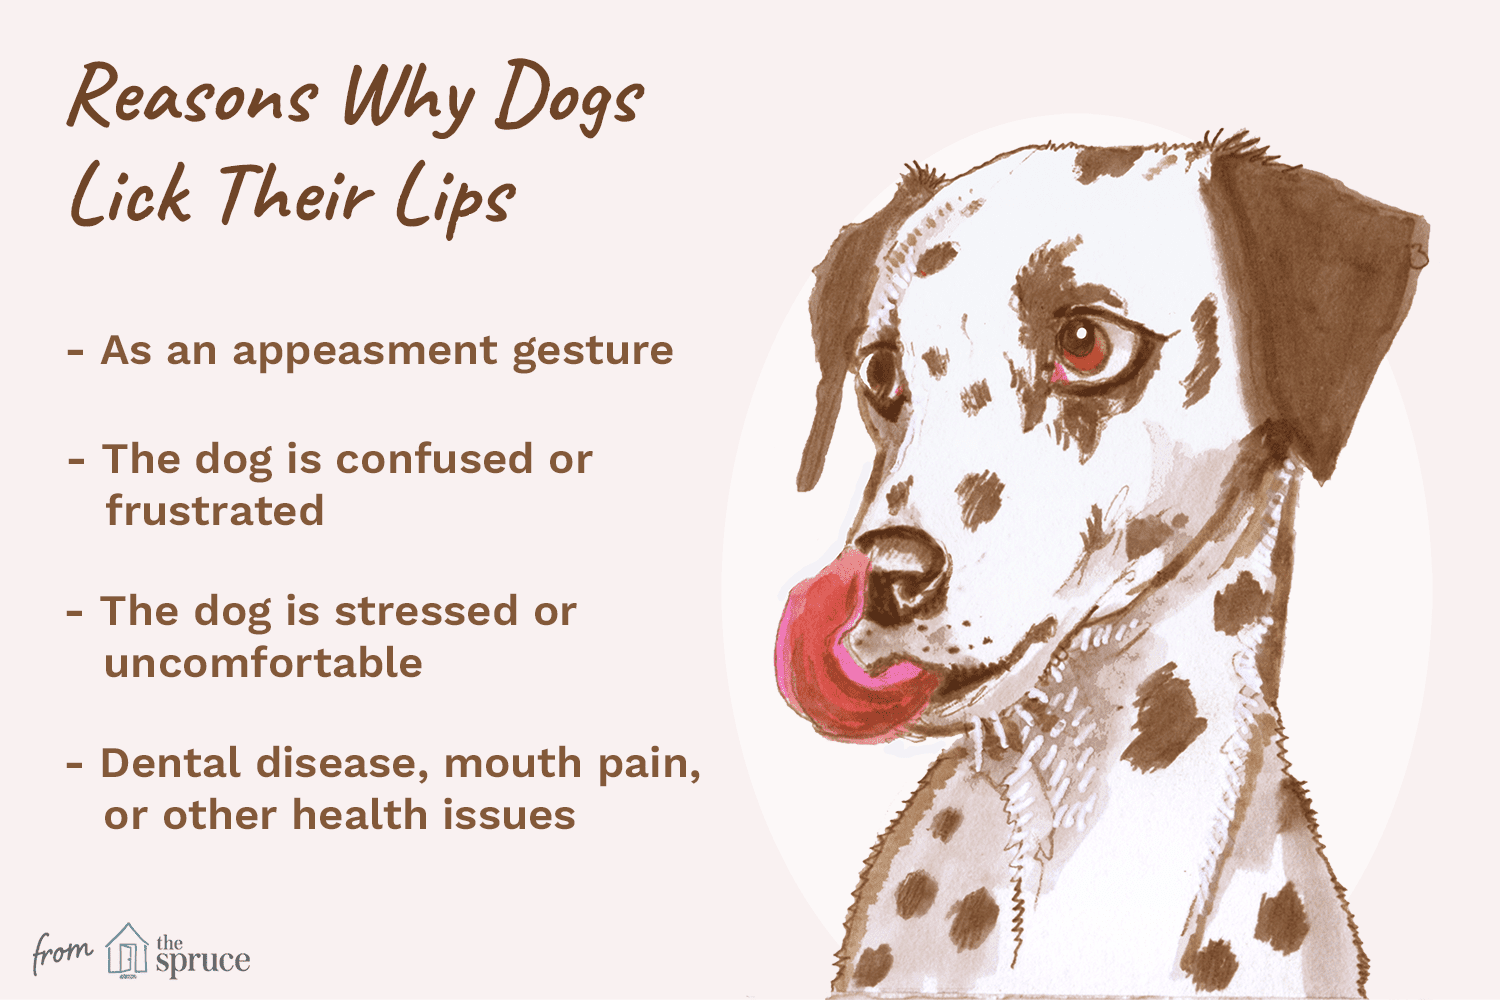 illustration of reasons why dogs lick their lips